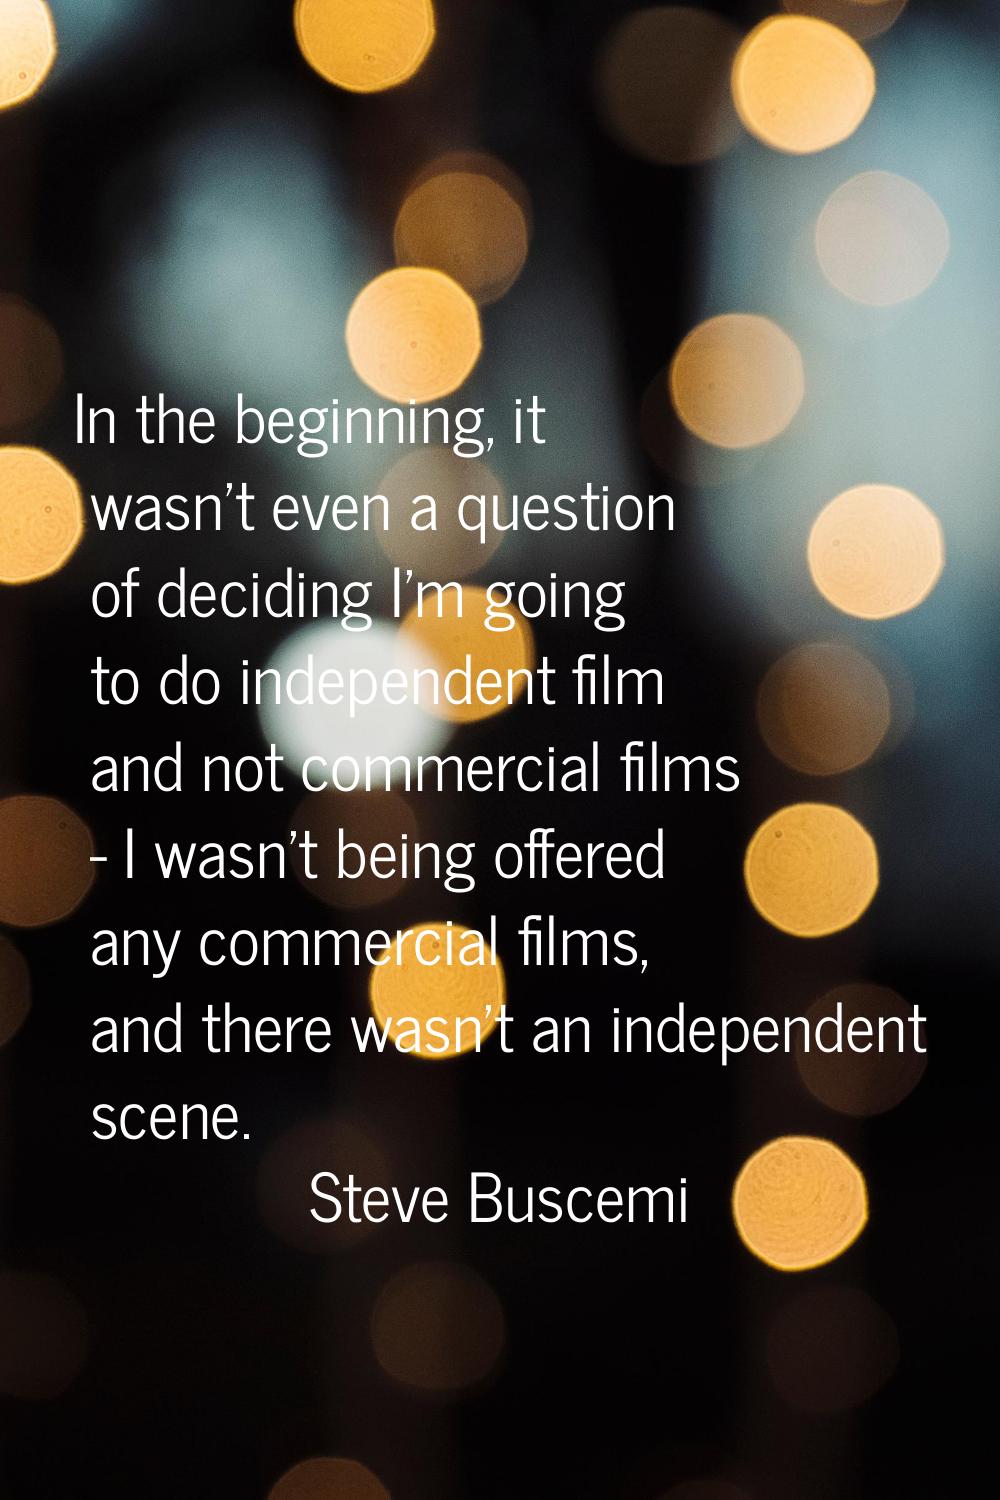 In the beginning, it wasn't even a question of deciding I'm going to do independent film and not co